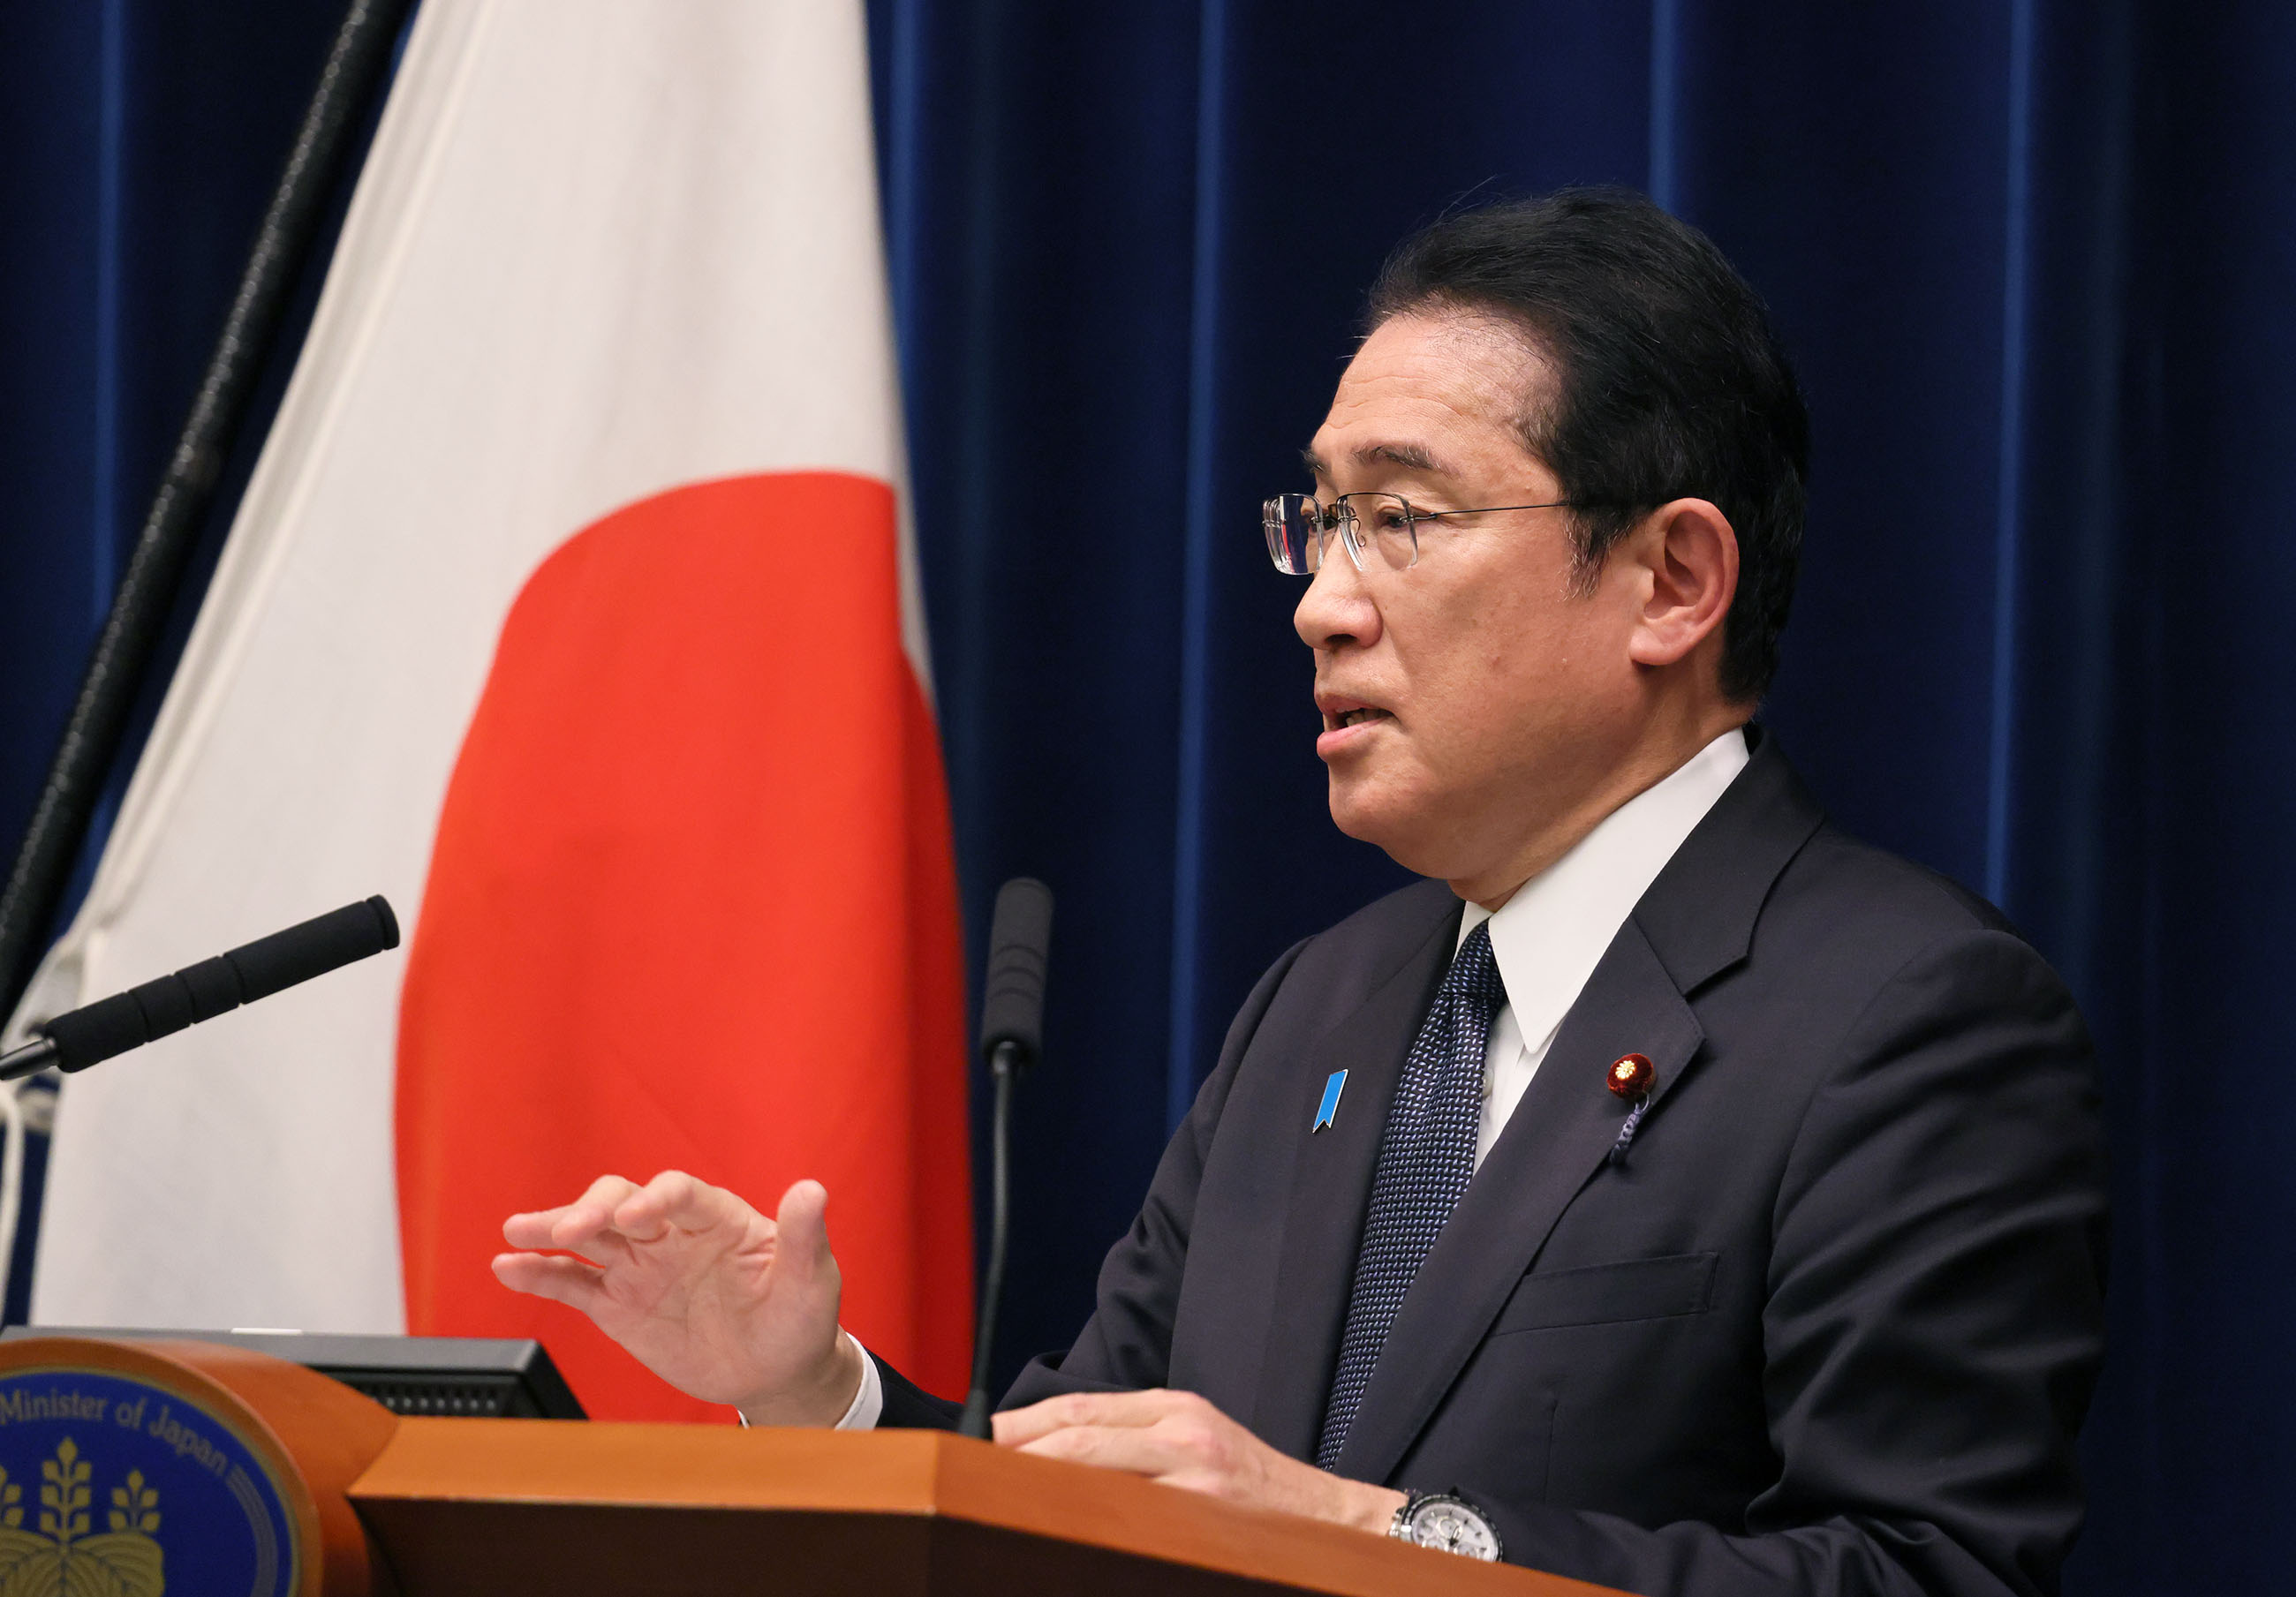 Prime Minister Kishida answering questions from the journalists (4)